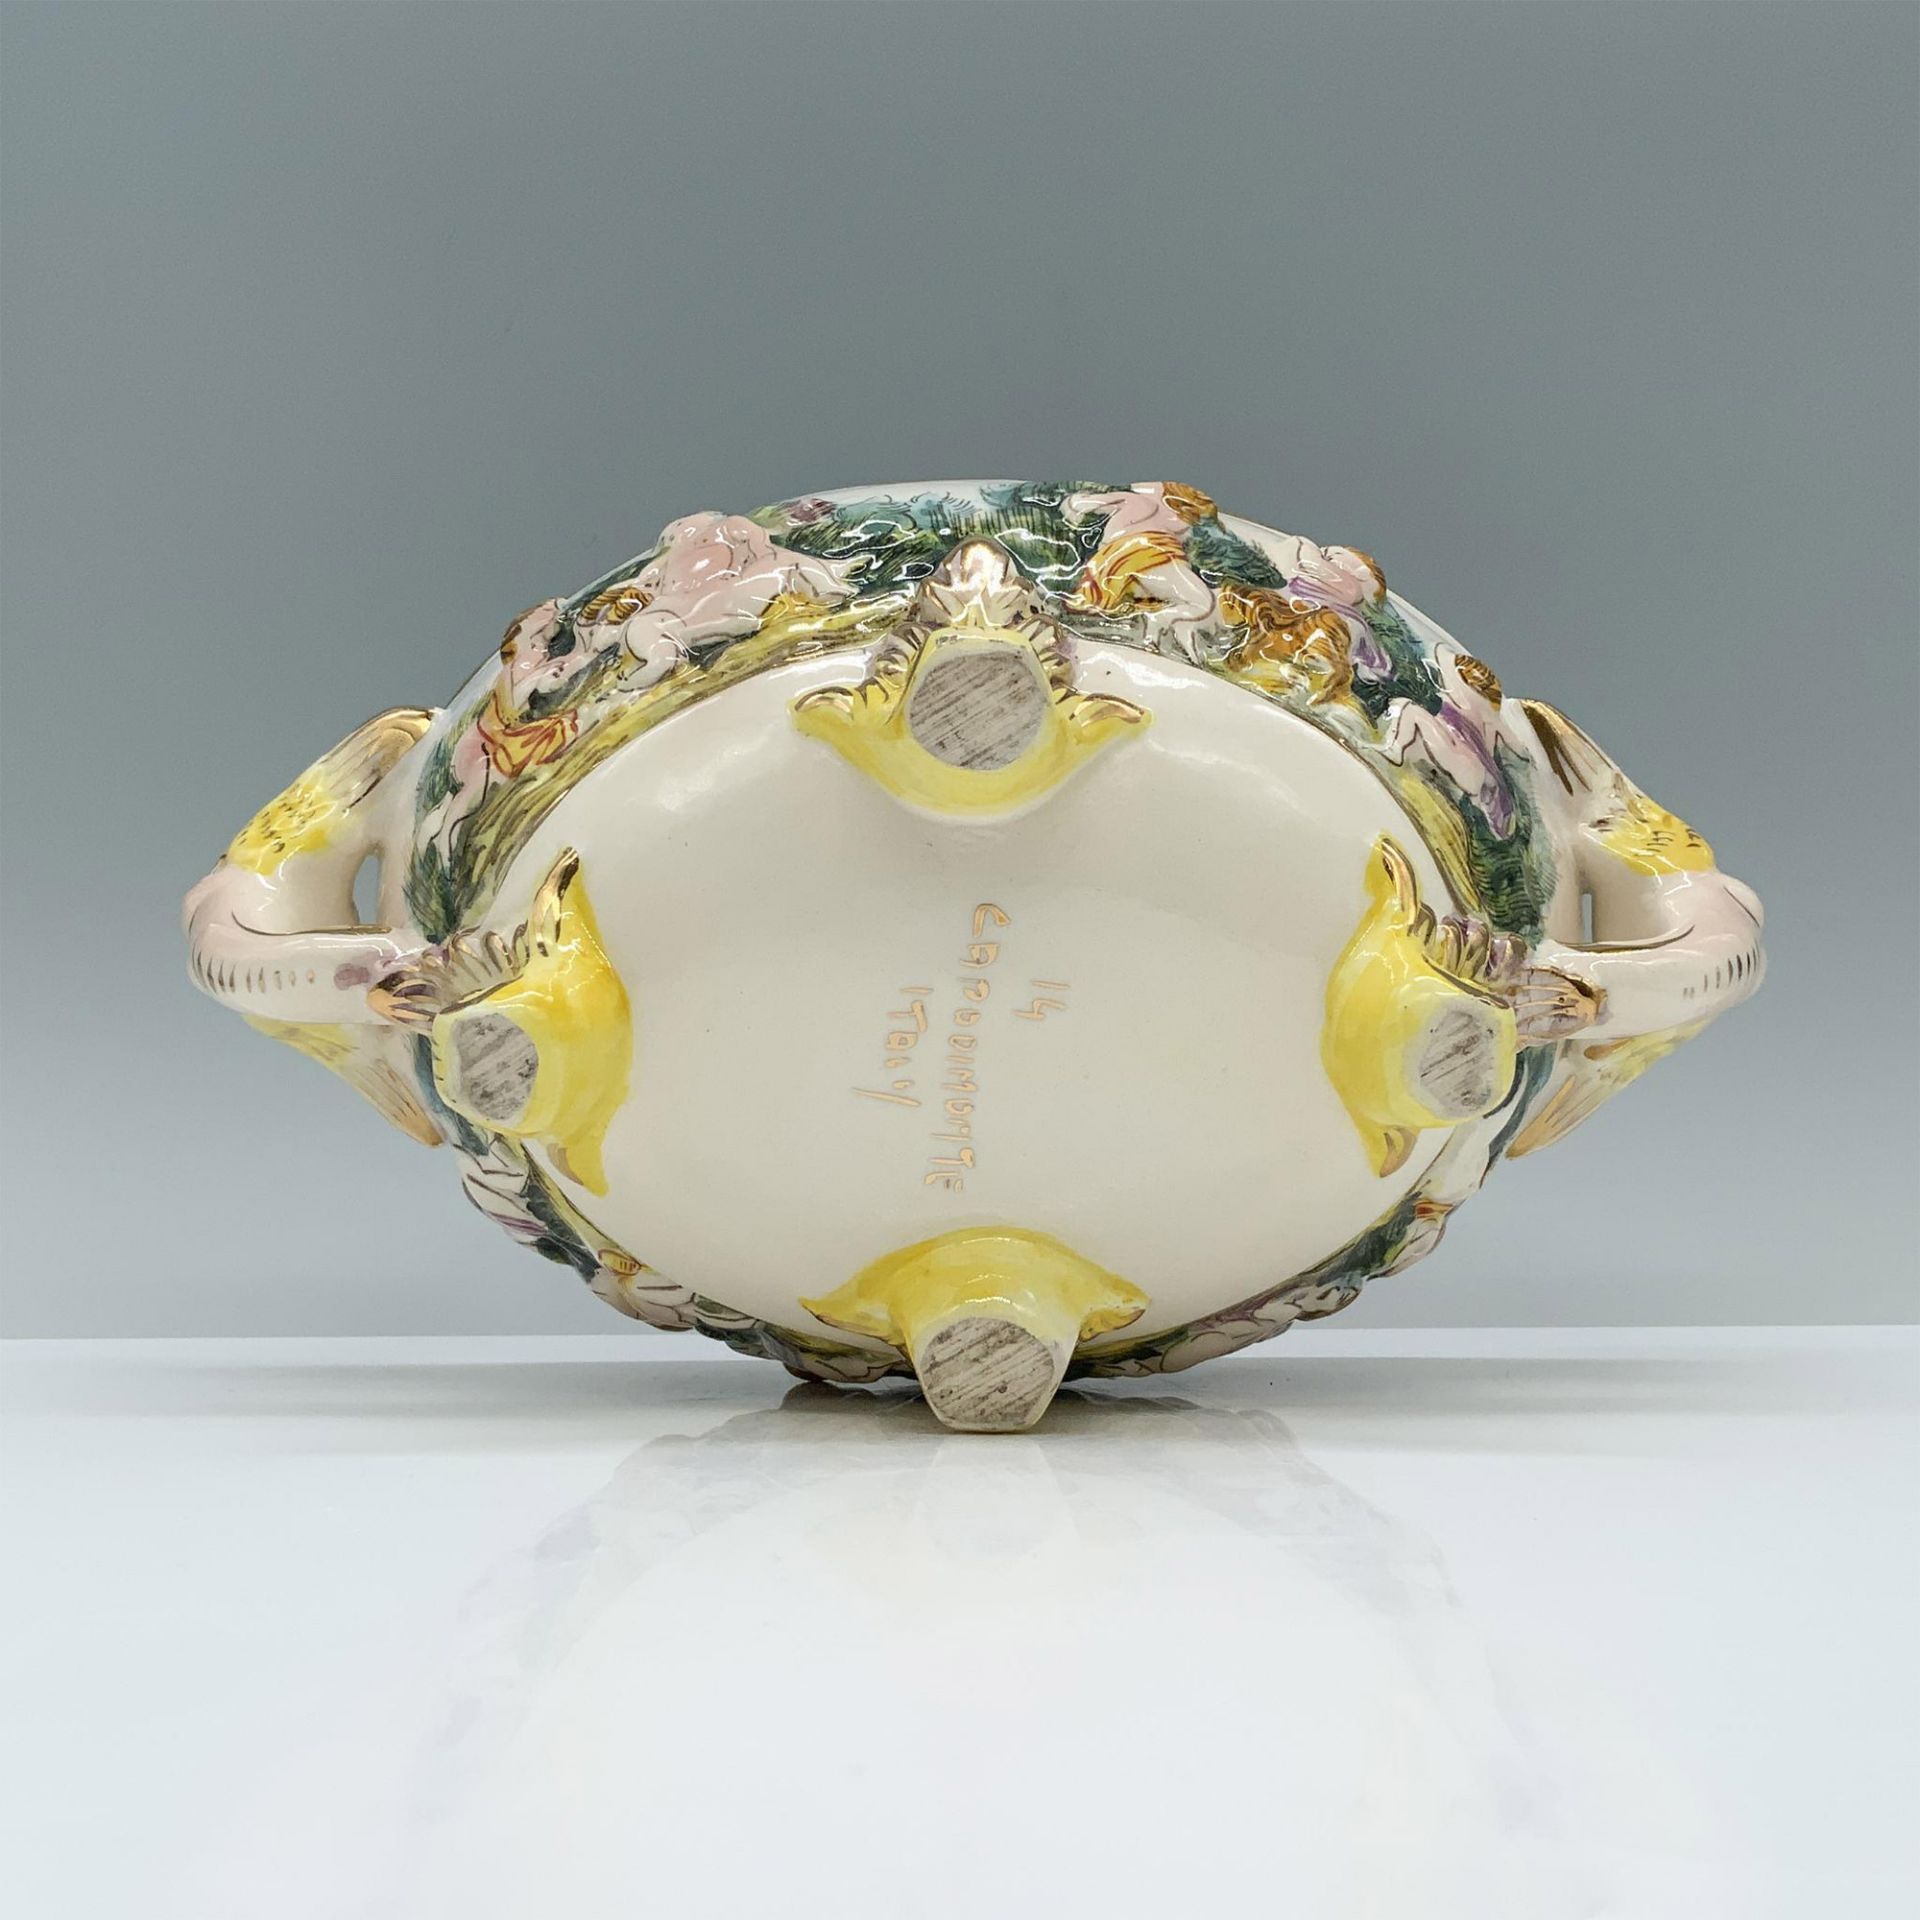 Capodimonte Porcelain Handled Serving Dish and Lid - Image 3 of 3